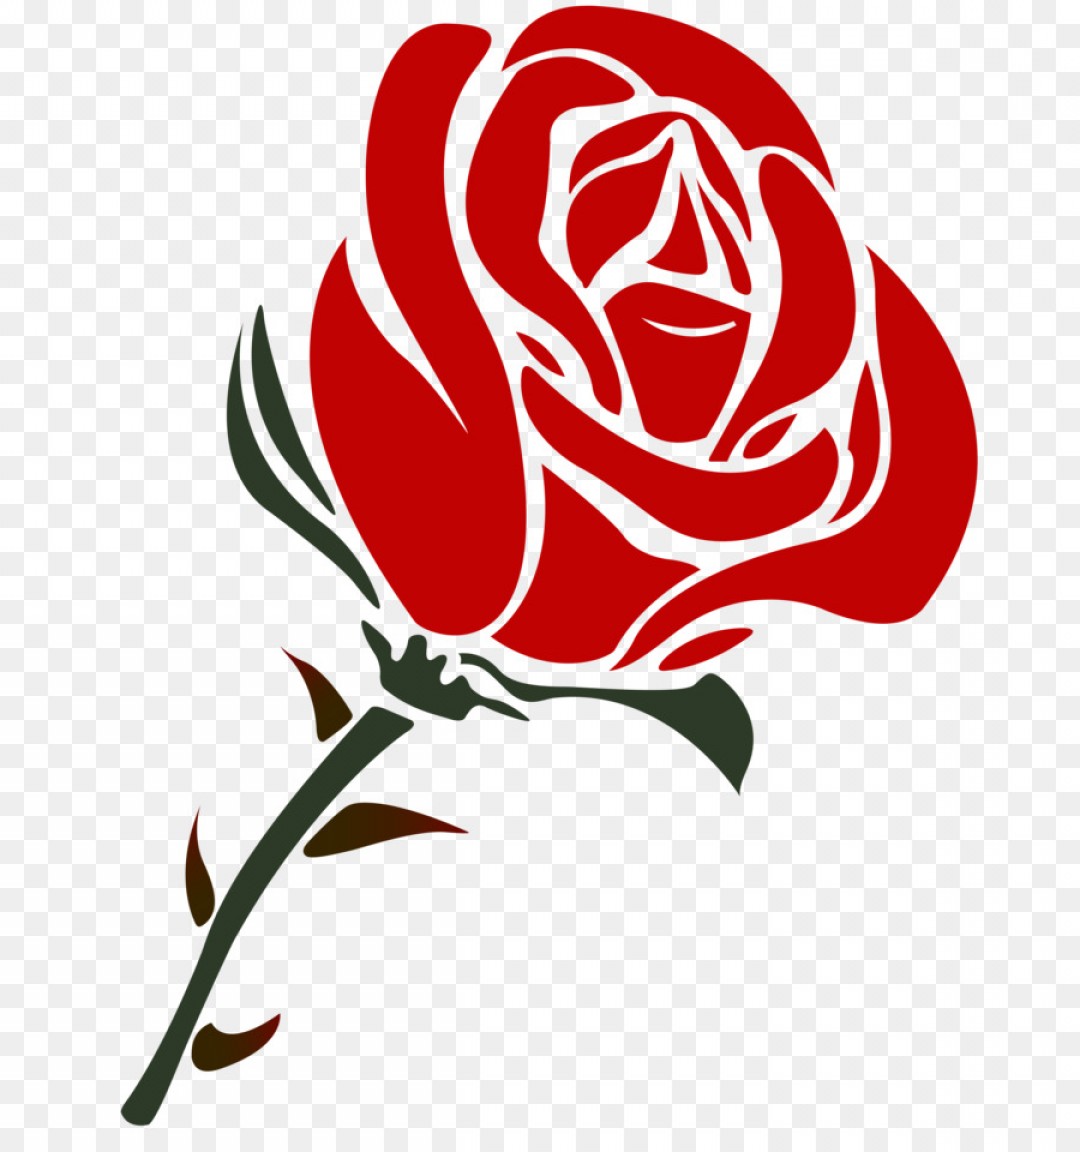 Png Rose Scalable Vector Graphics Valentines Day Clip.